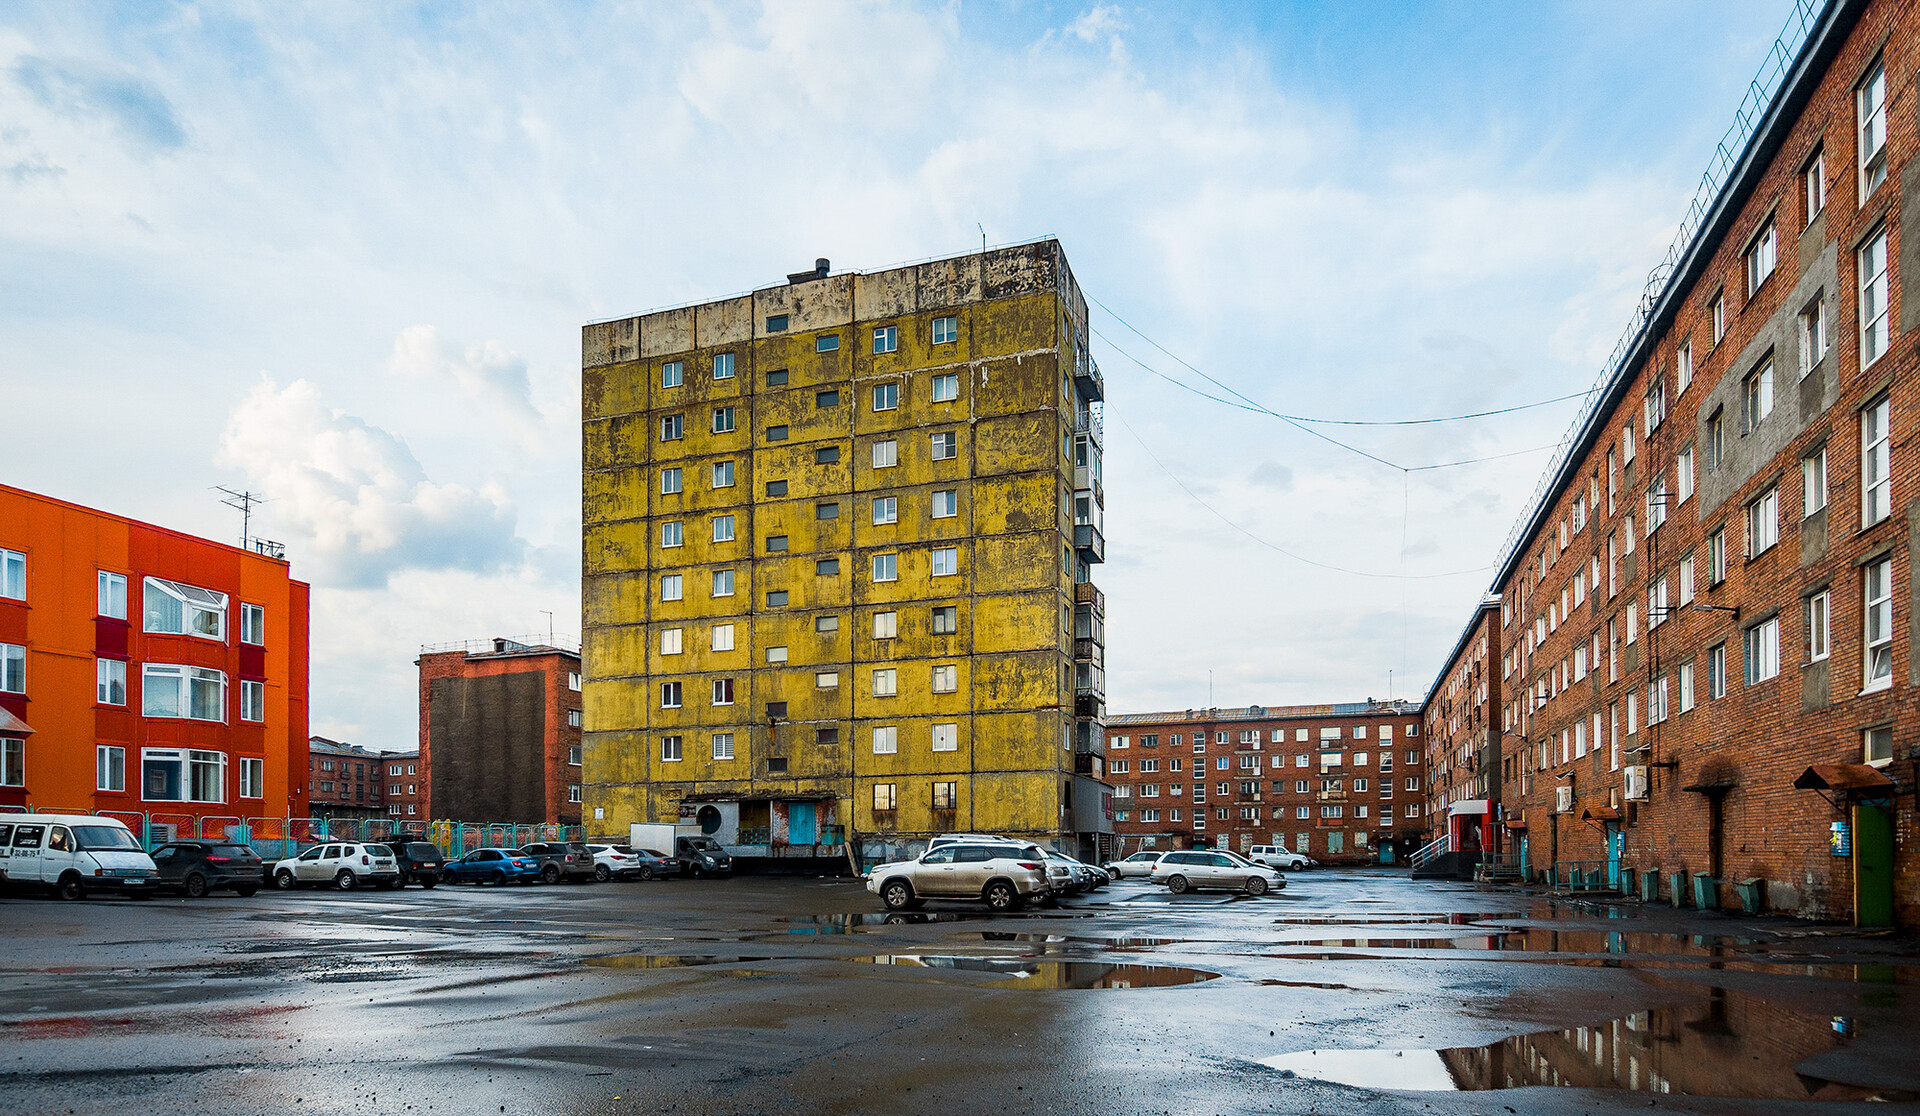 One of the yards near the center of Norilsk.